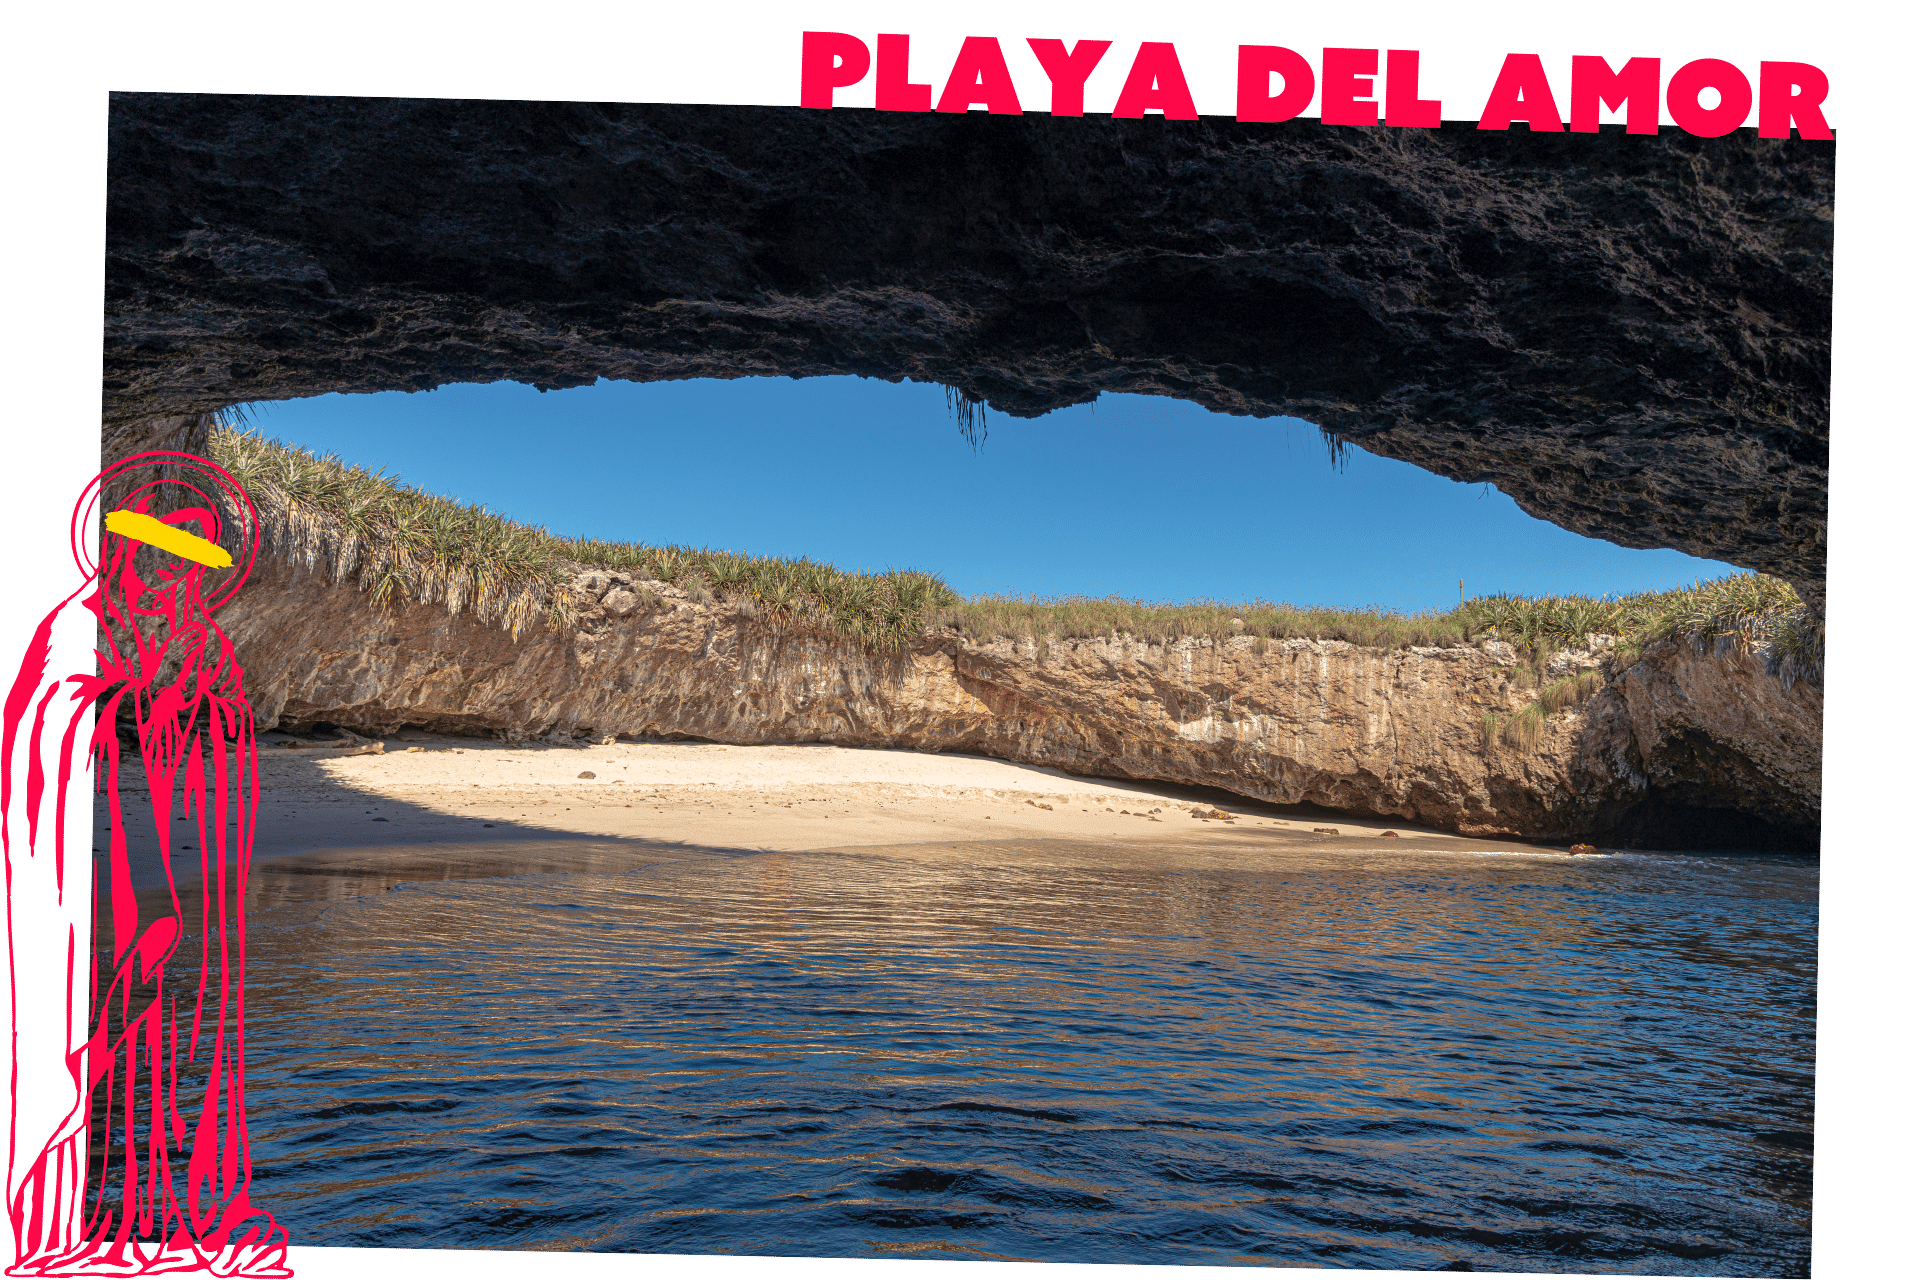 Hidden Beach in Mexico is one the world's most unique beaches.